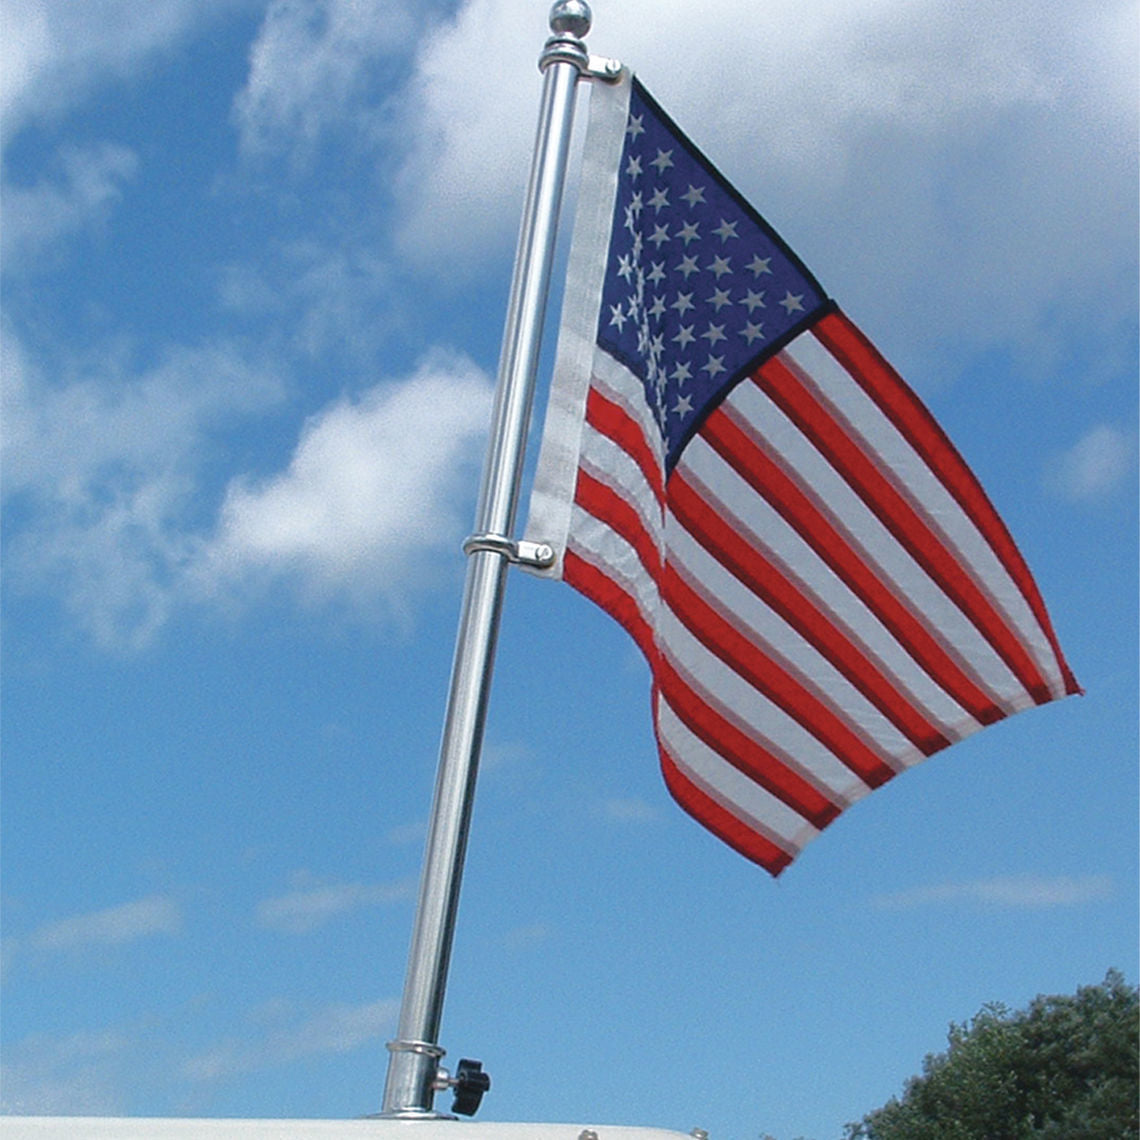 Stainless Steel Deluxe Boat Flag Pole - 30"